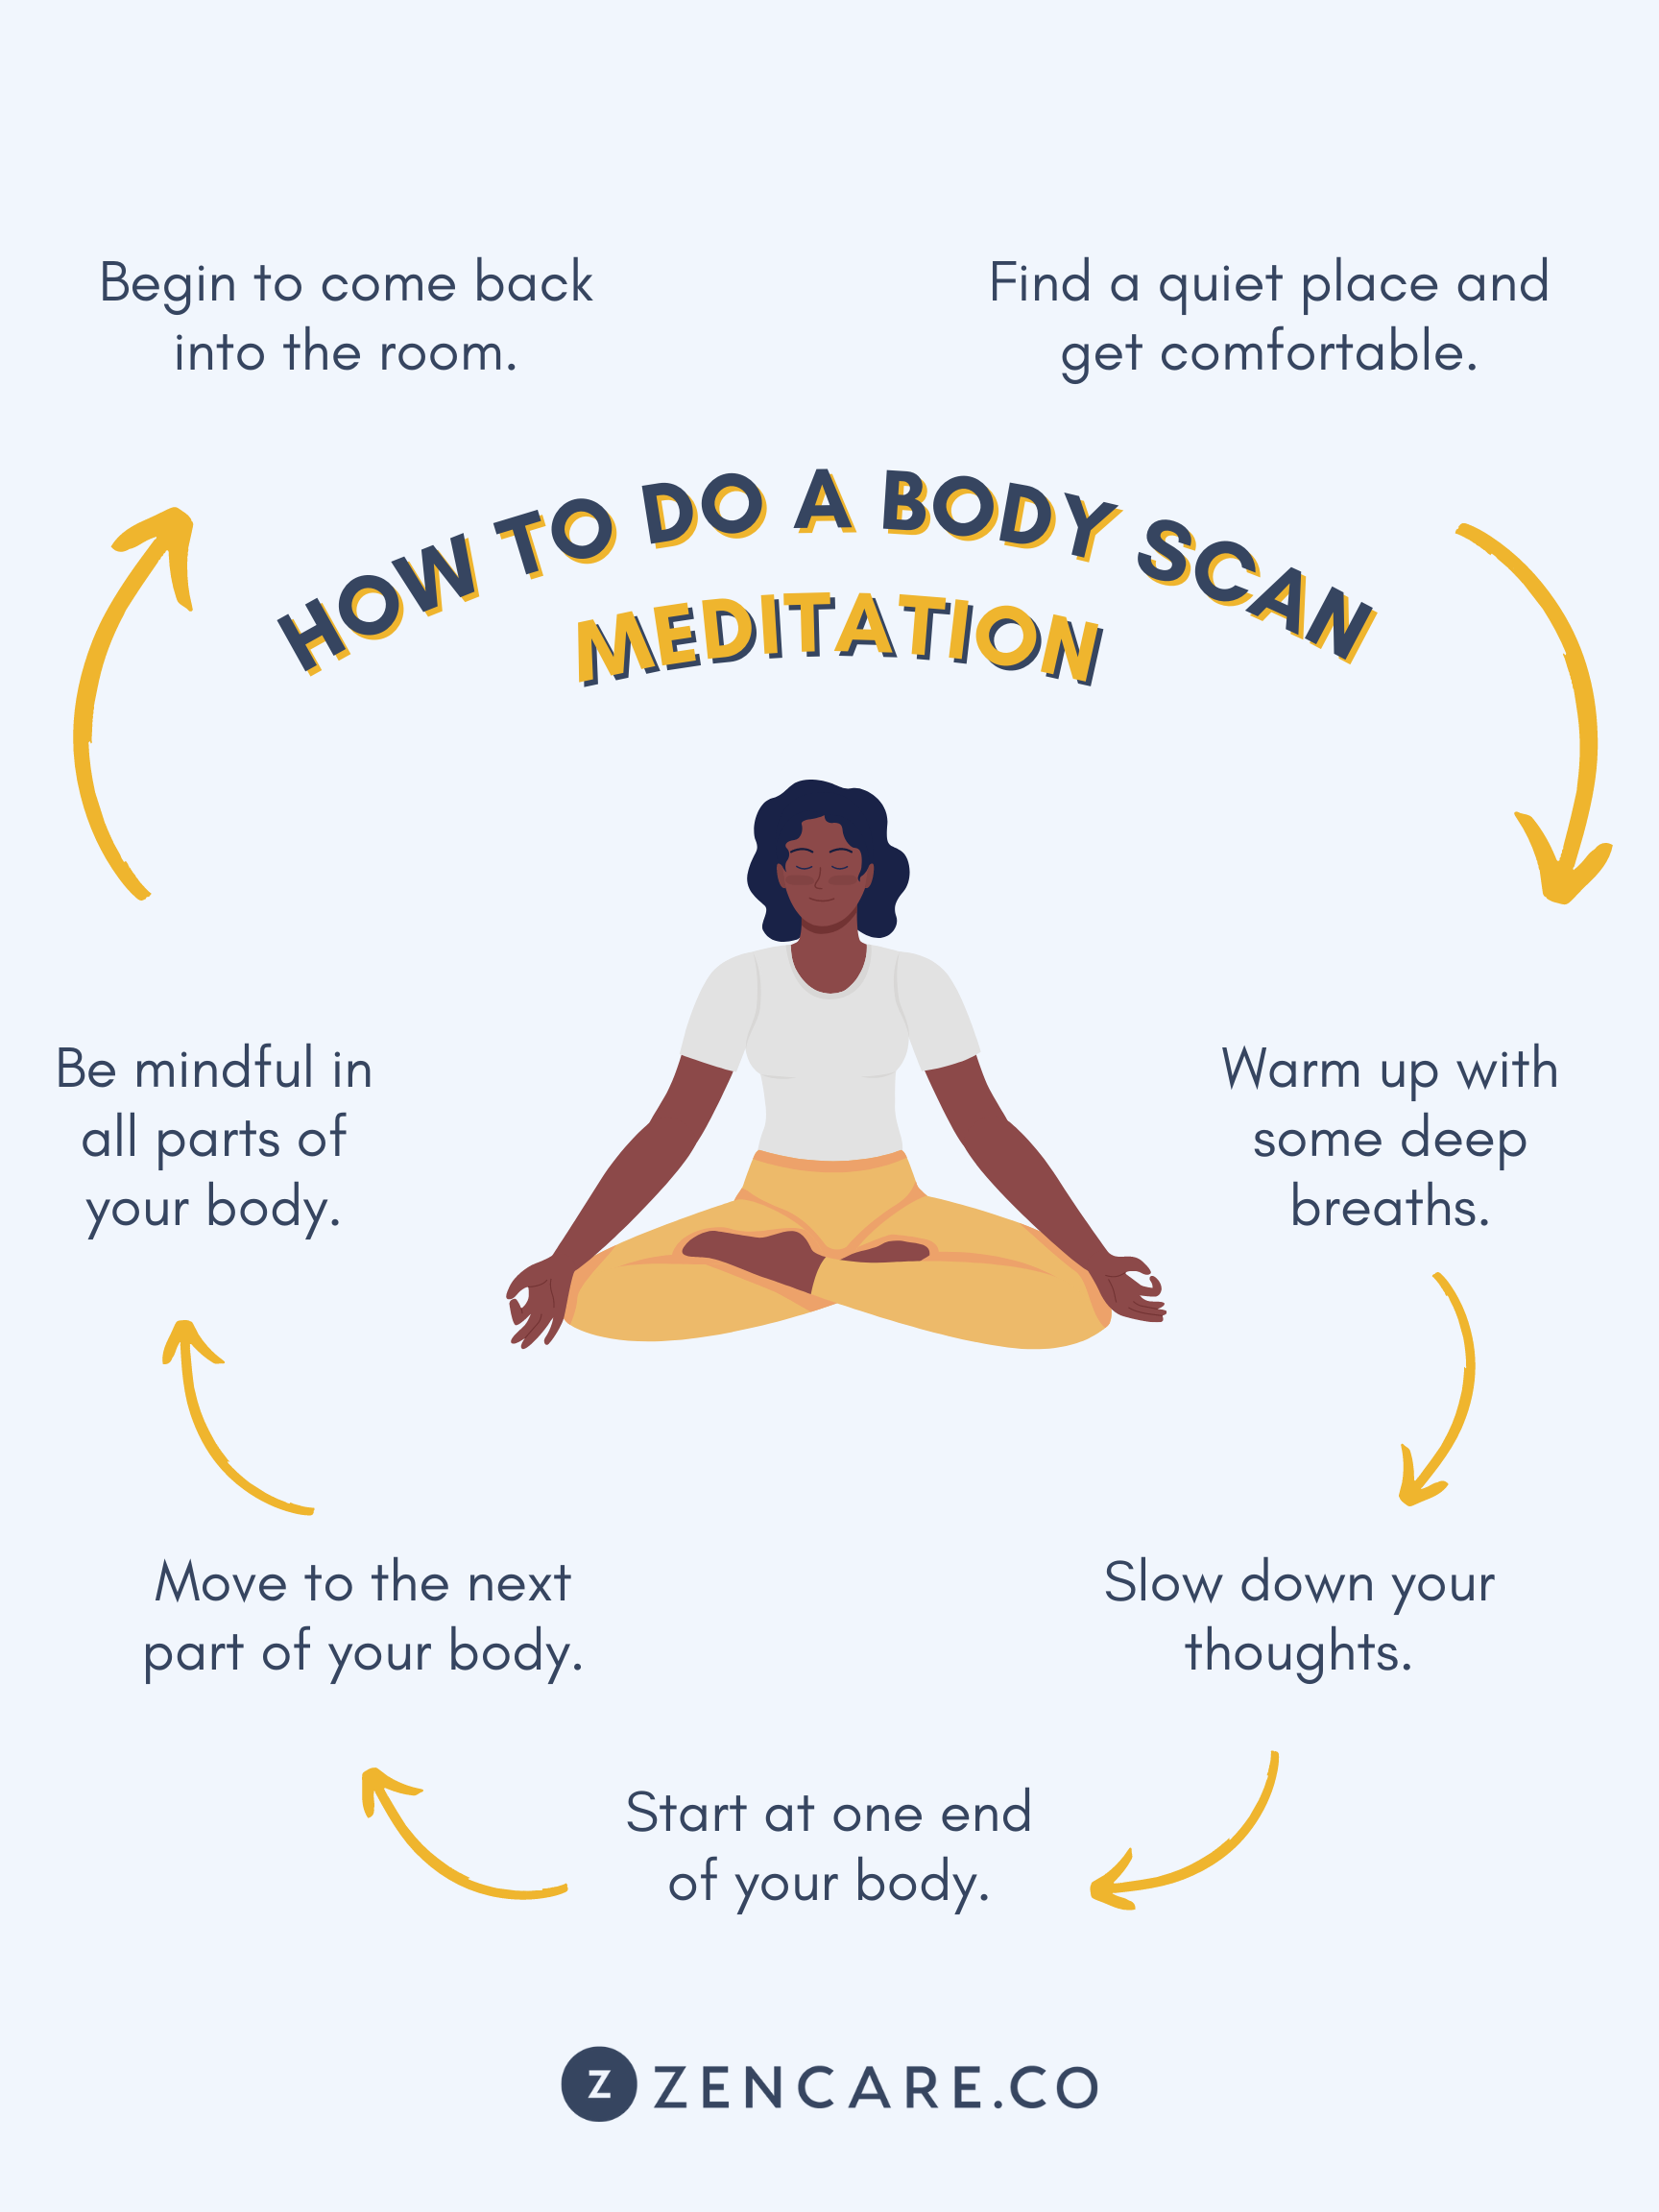 Body Scan Meditation: The Procedure and Benefits for Mental Health